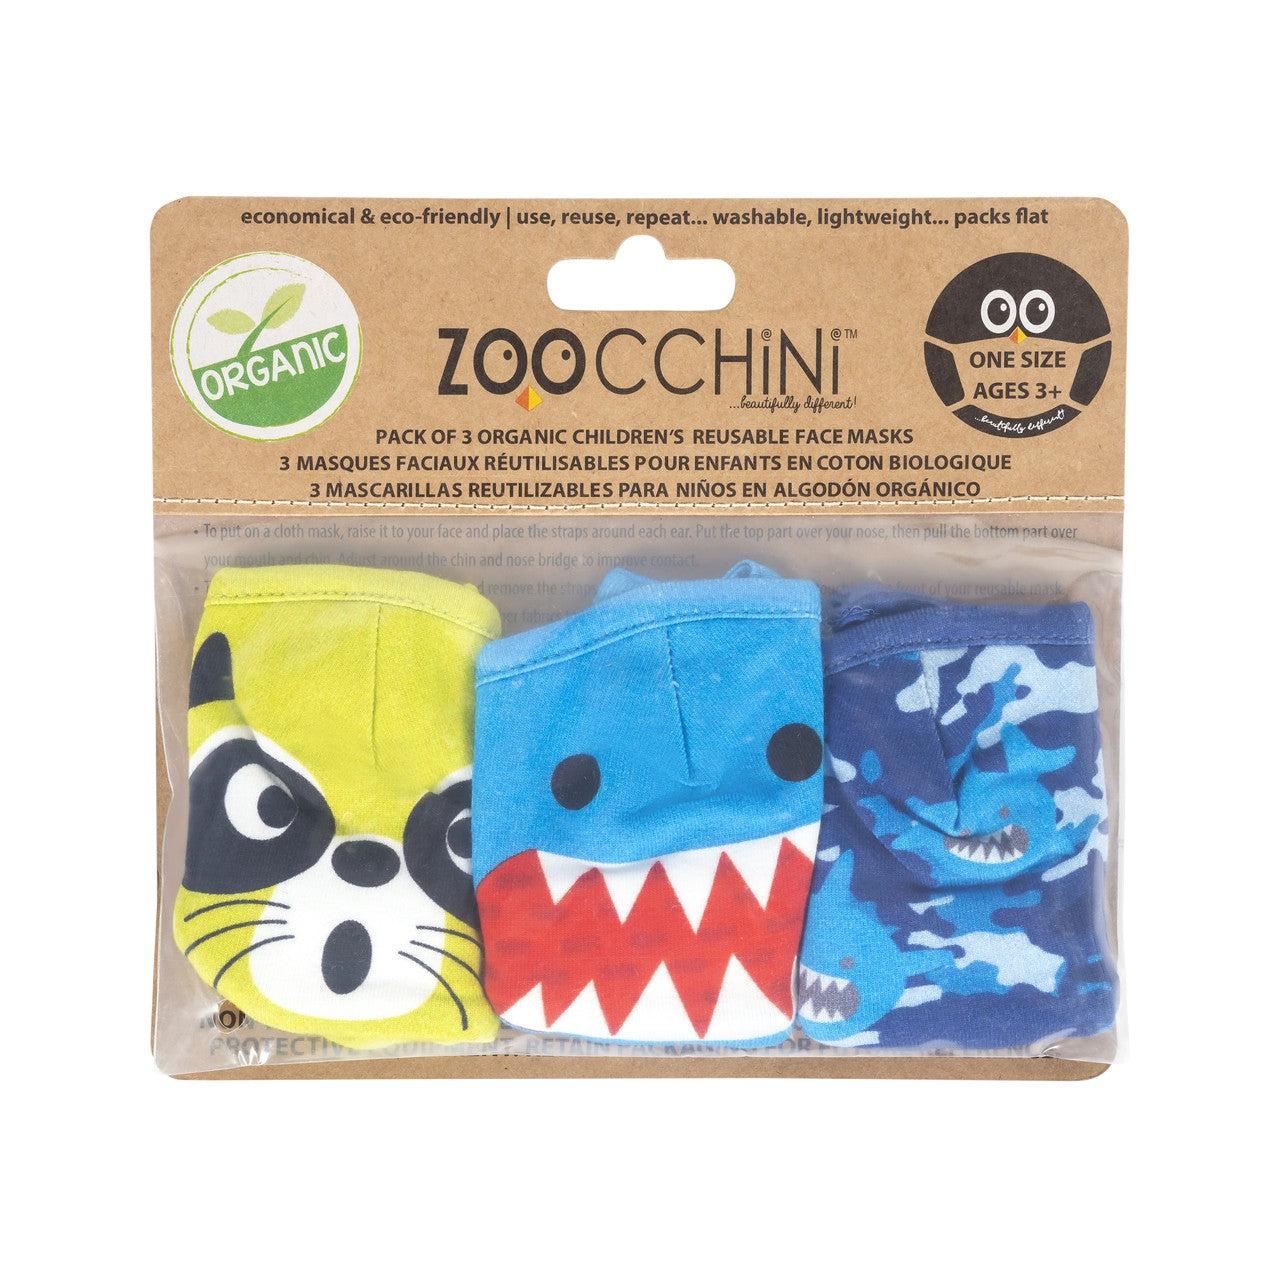 Reusable Face Covering - Pack of 3 - Shark